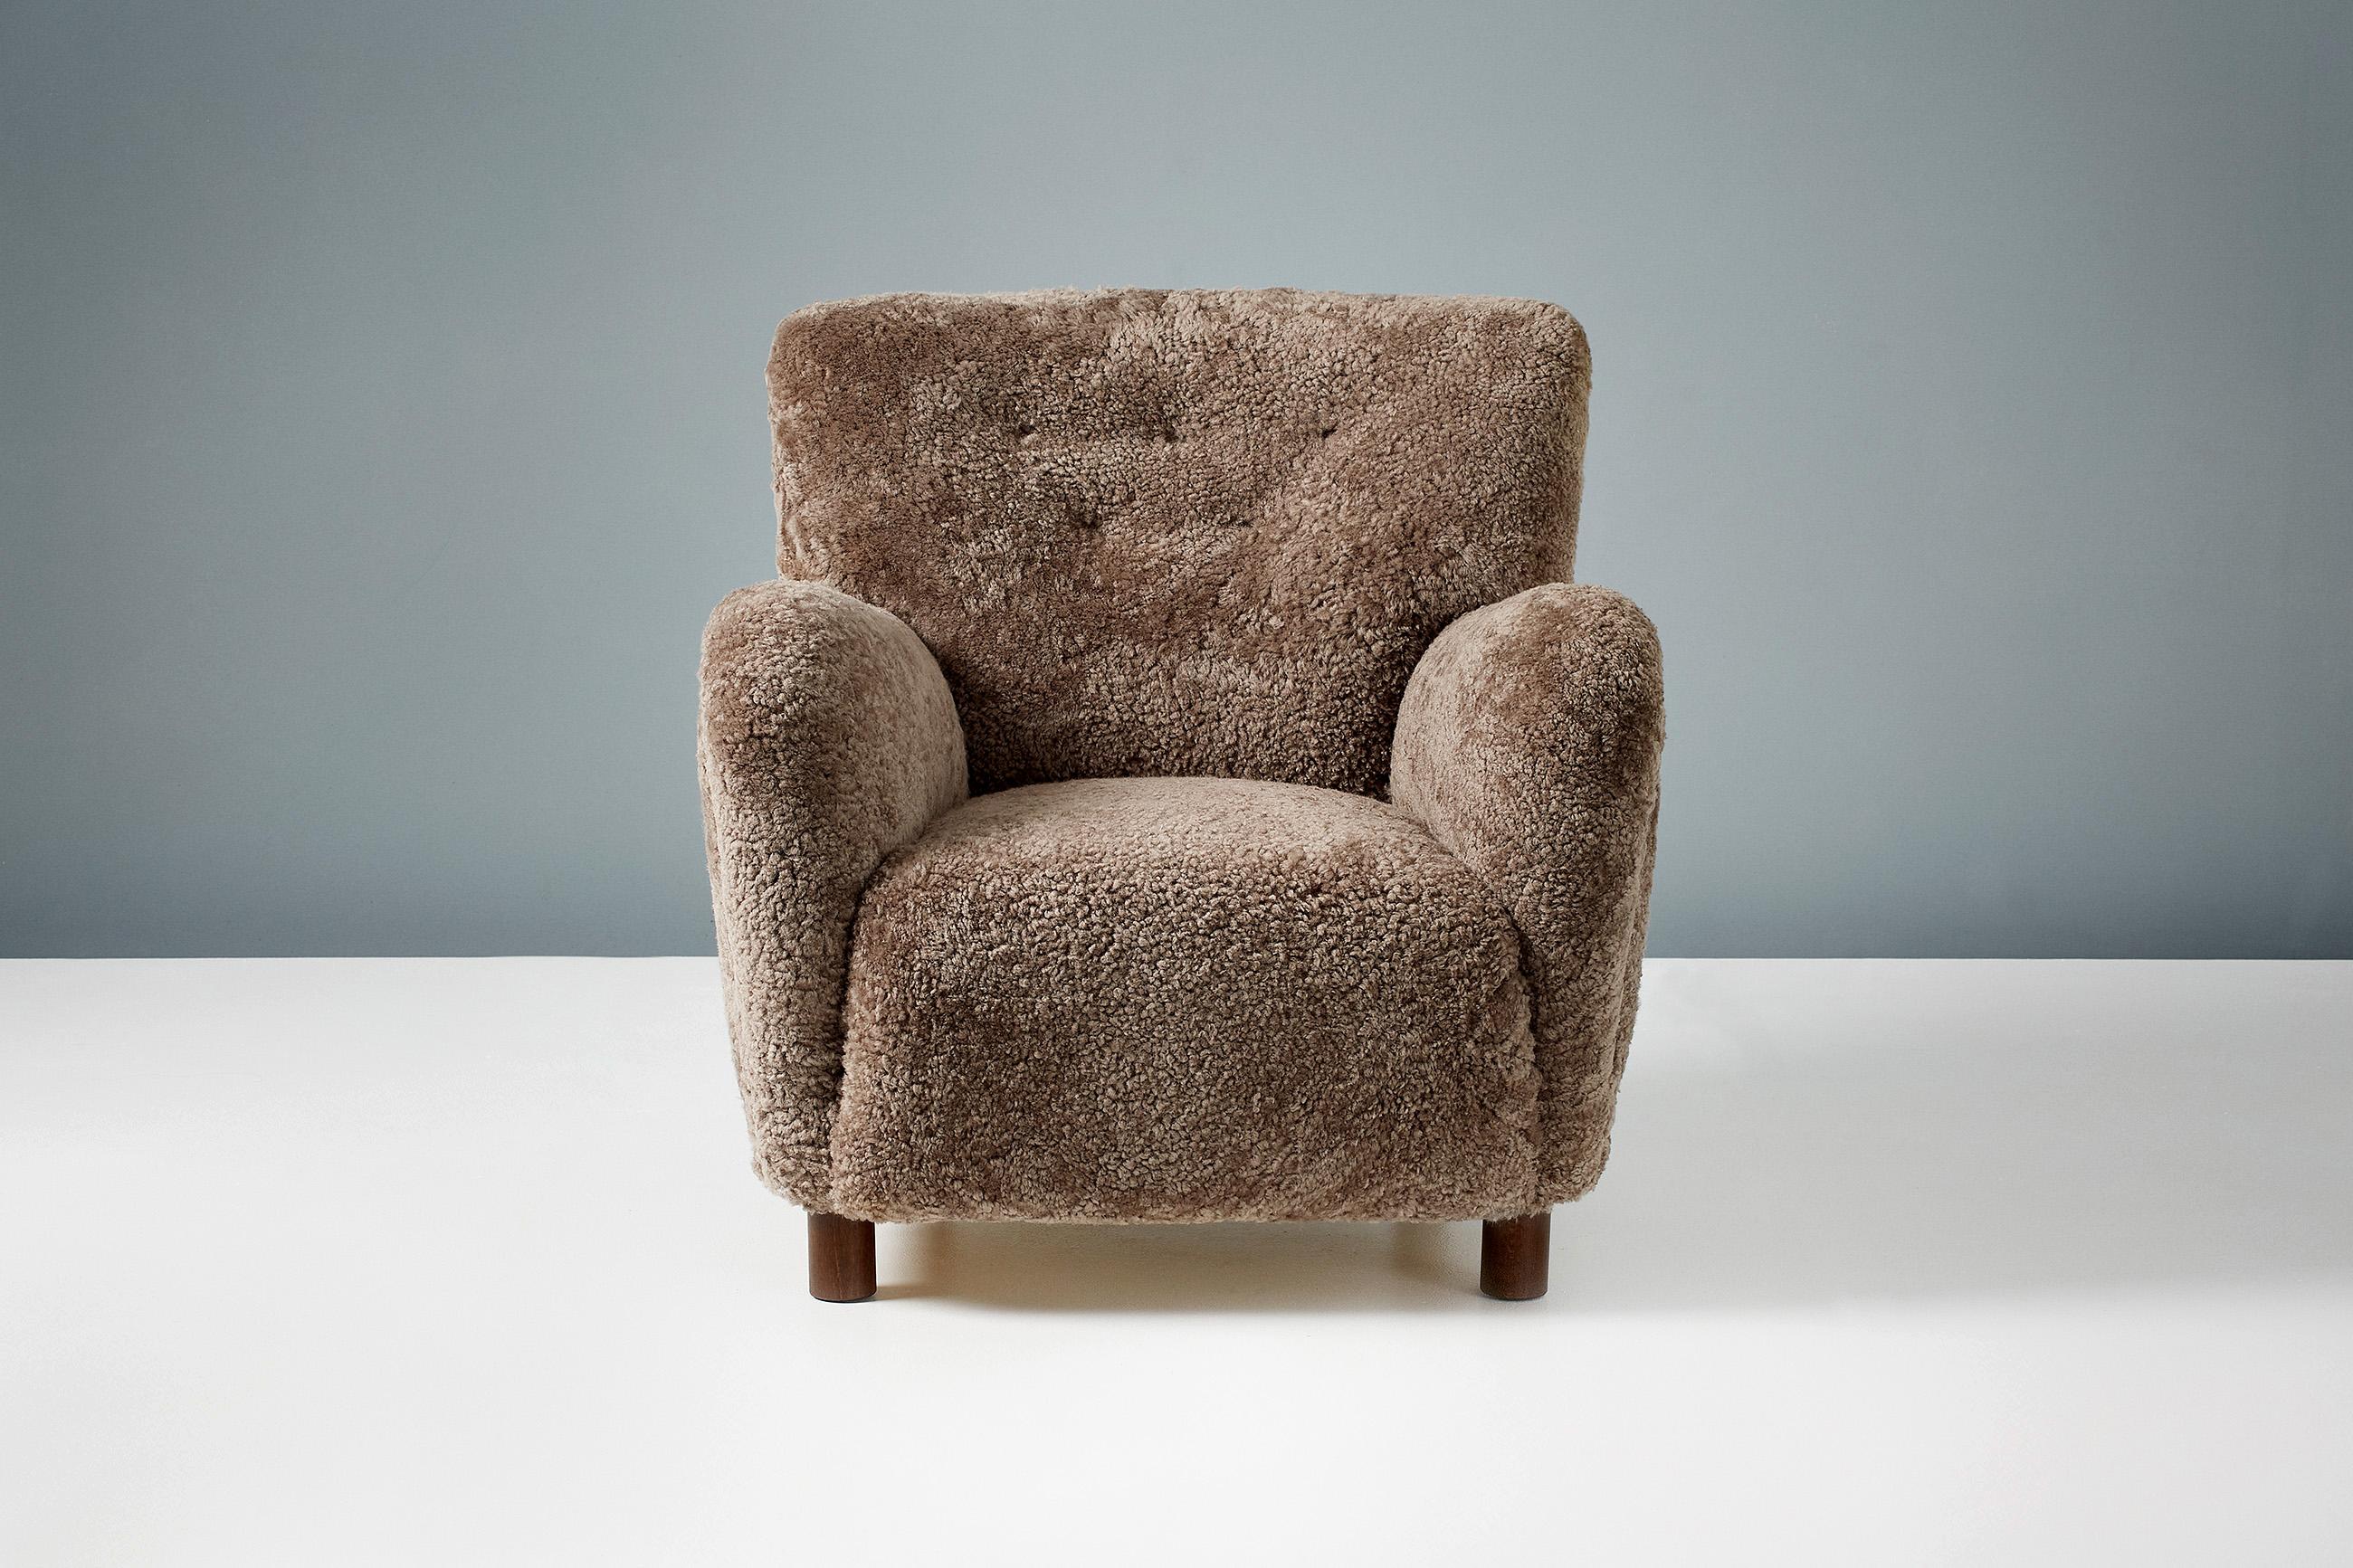 Dagmar Design - Model 54 lounge chair.

The Model 54 is from our custom-made upholstered range. This piece has been developed and hand-made at our workshops in London using the highest quality materials. The frame is solid beech wood with a fully